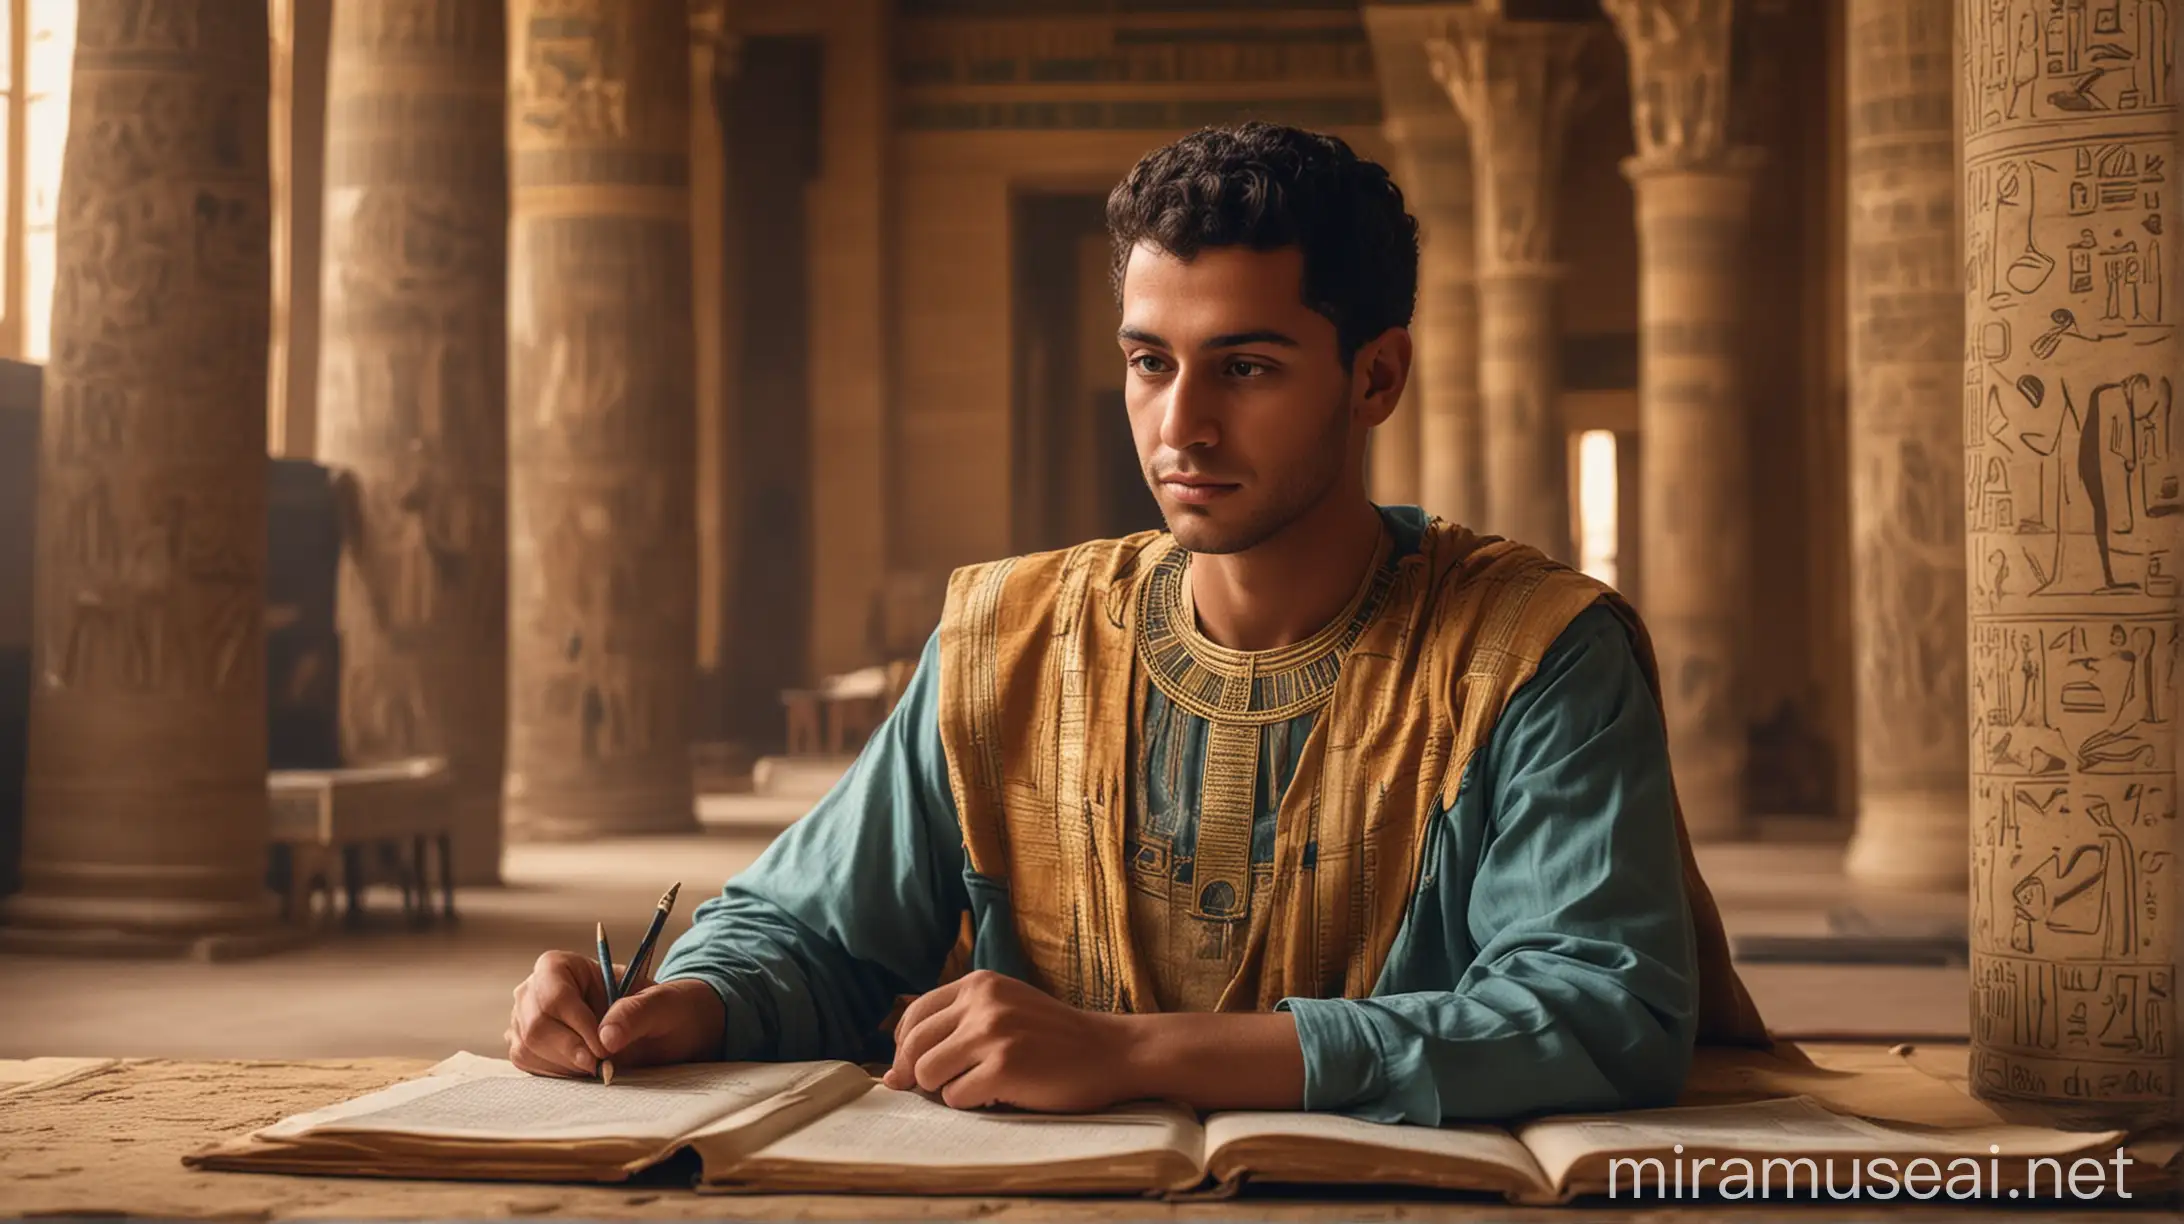 Noble Egyptian Man Studying in Ancient Palace